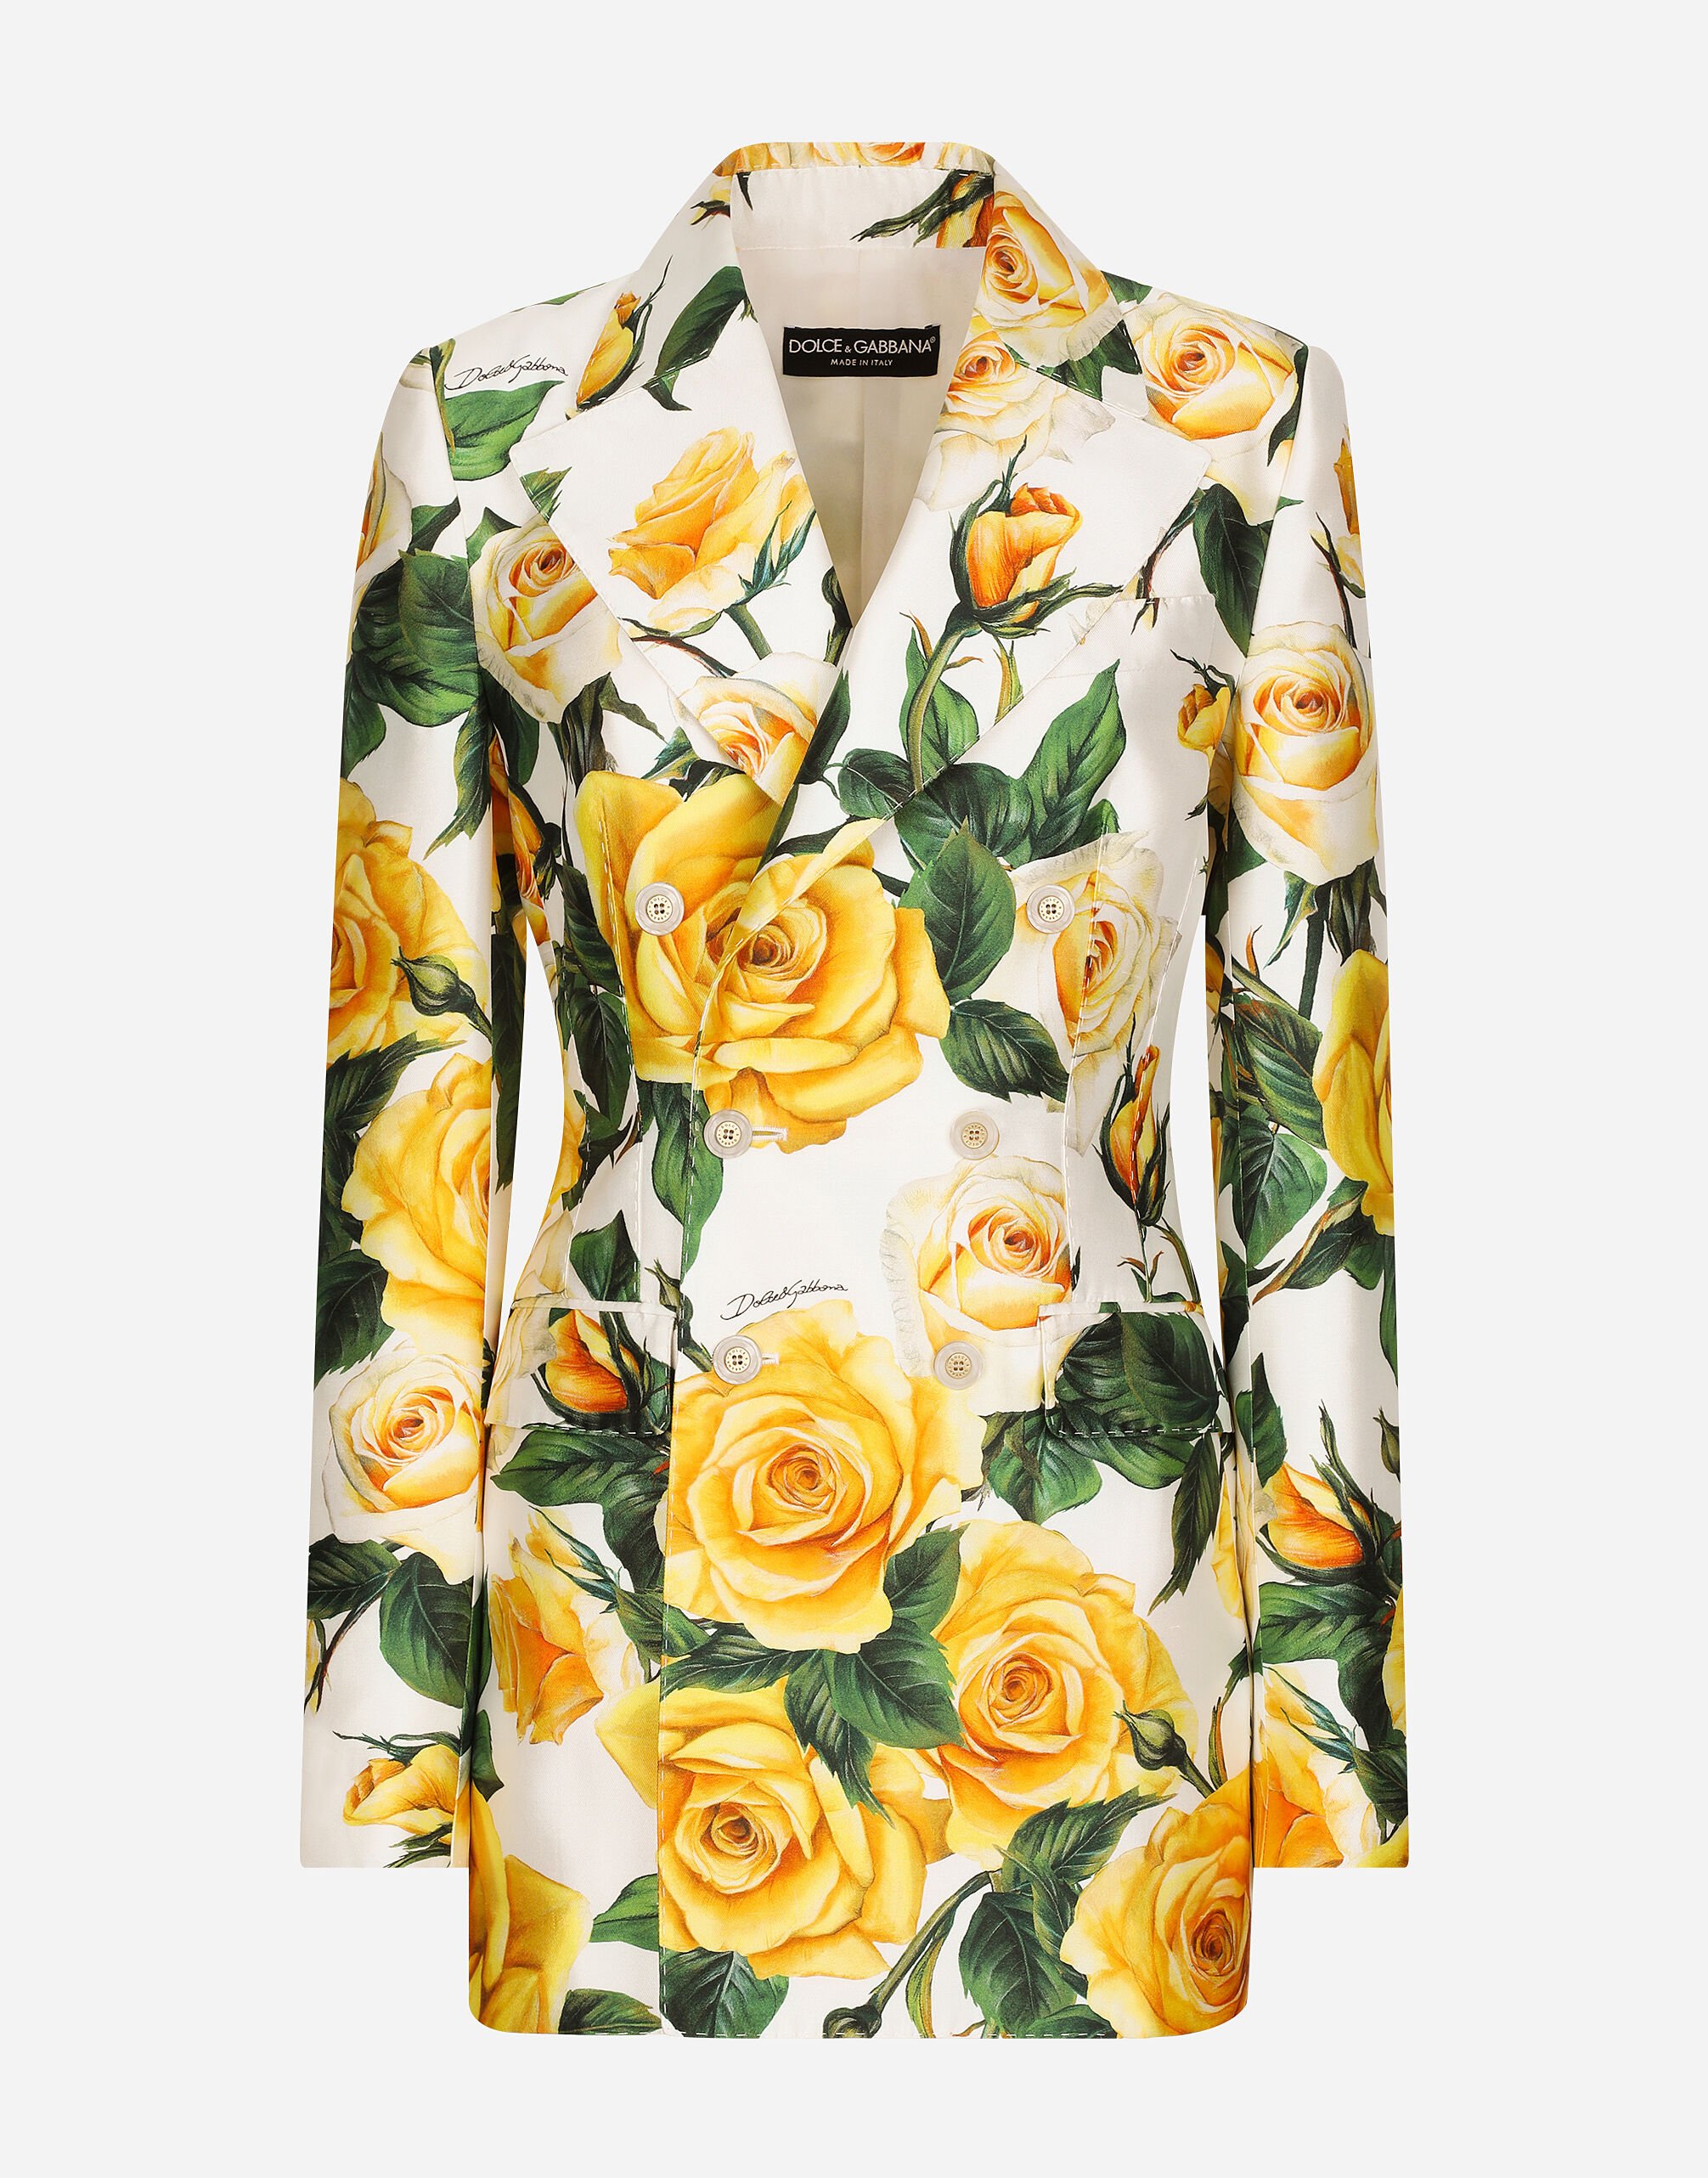 Dolce & Gabbana Double-breasted Turlington jacket in yellow rose-print mikado Green BB7158AW437